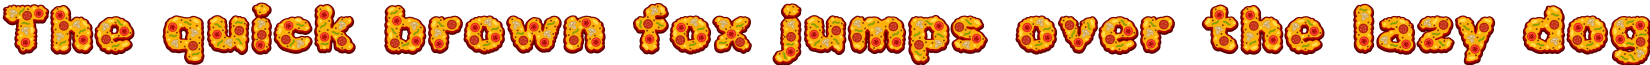 Fresh Pizza preview